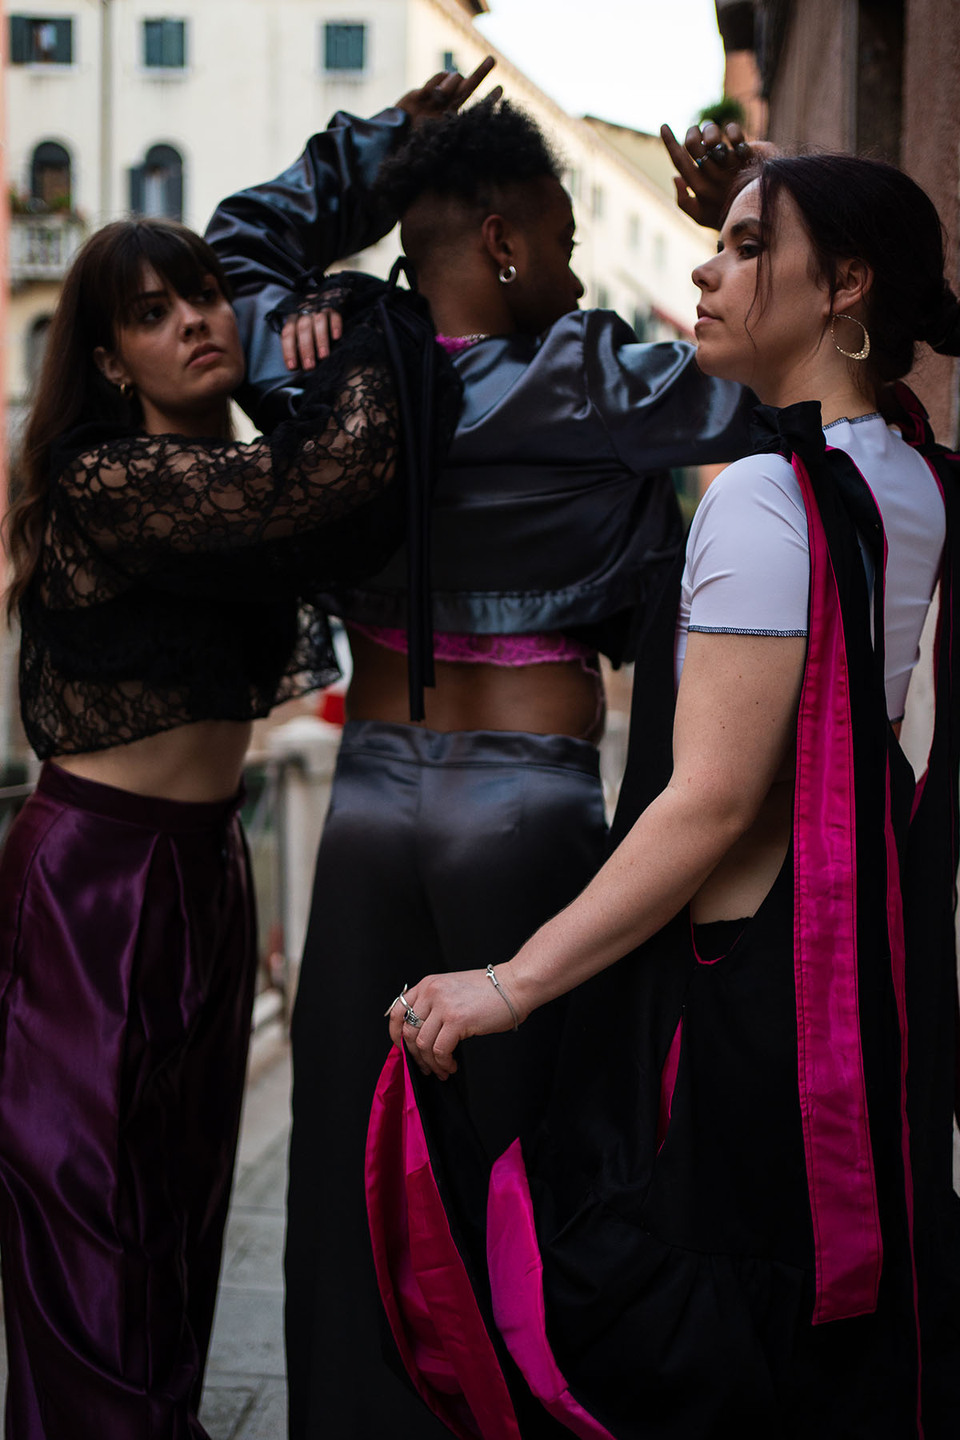 A man and two women modelling Flamenco inspired streetwear from a collection by Paula Pacheco beside the canal in Seville